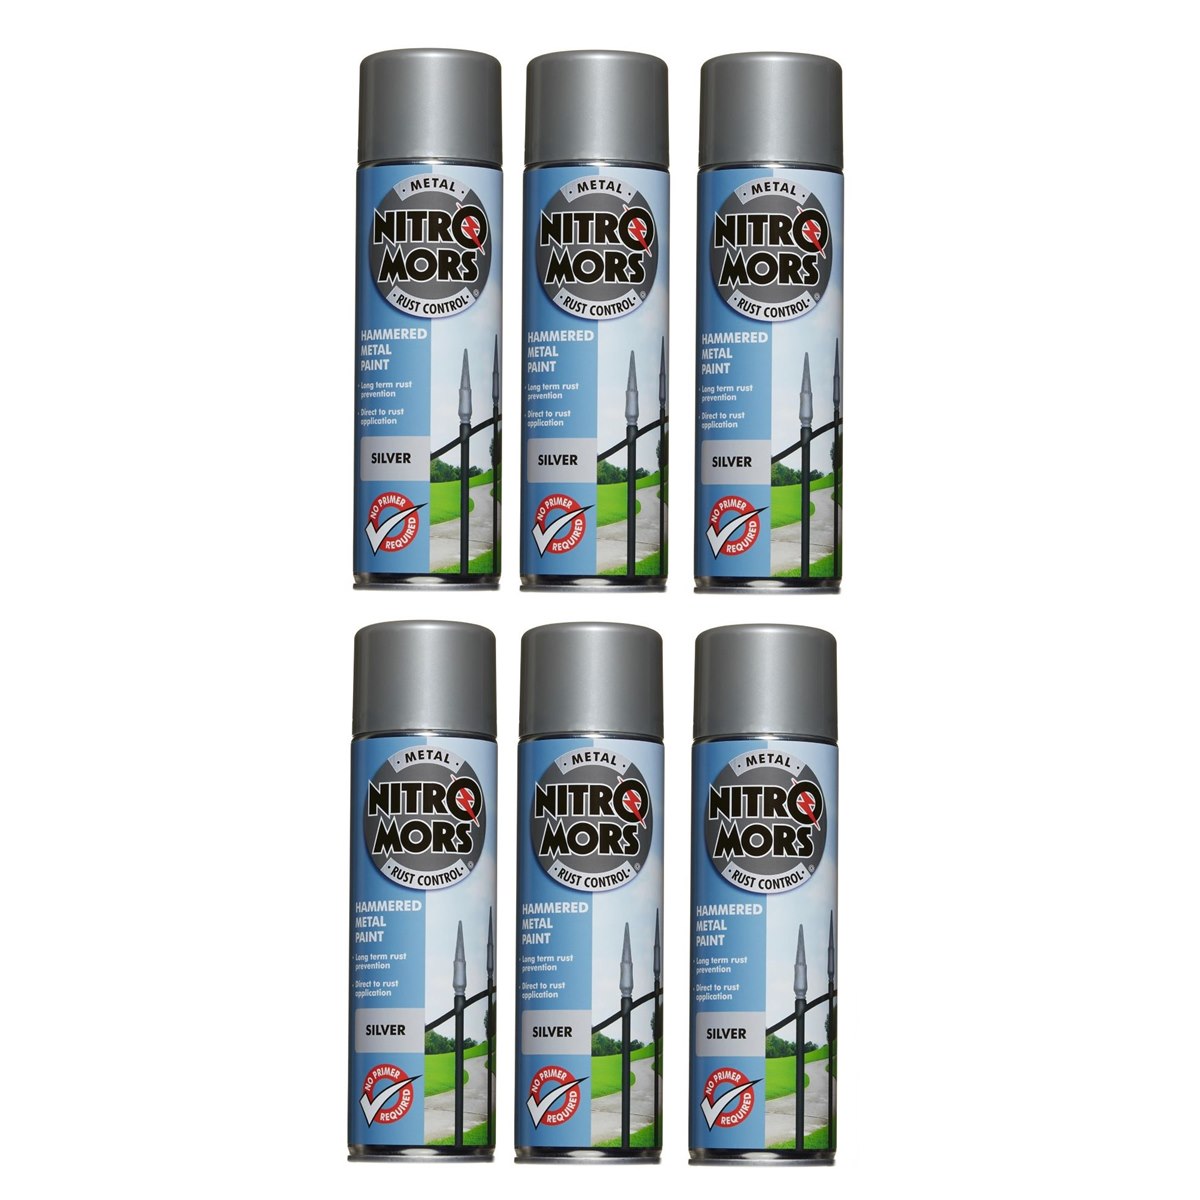 Case of 6 x NitroMors Hammered Metal Paint 500ml Silver